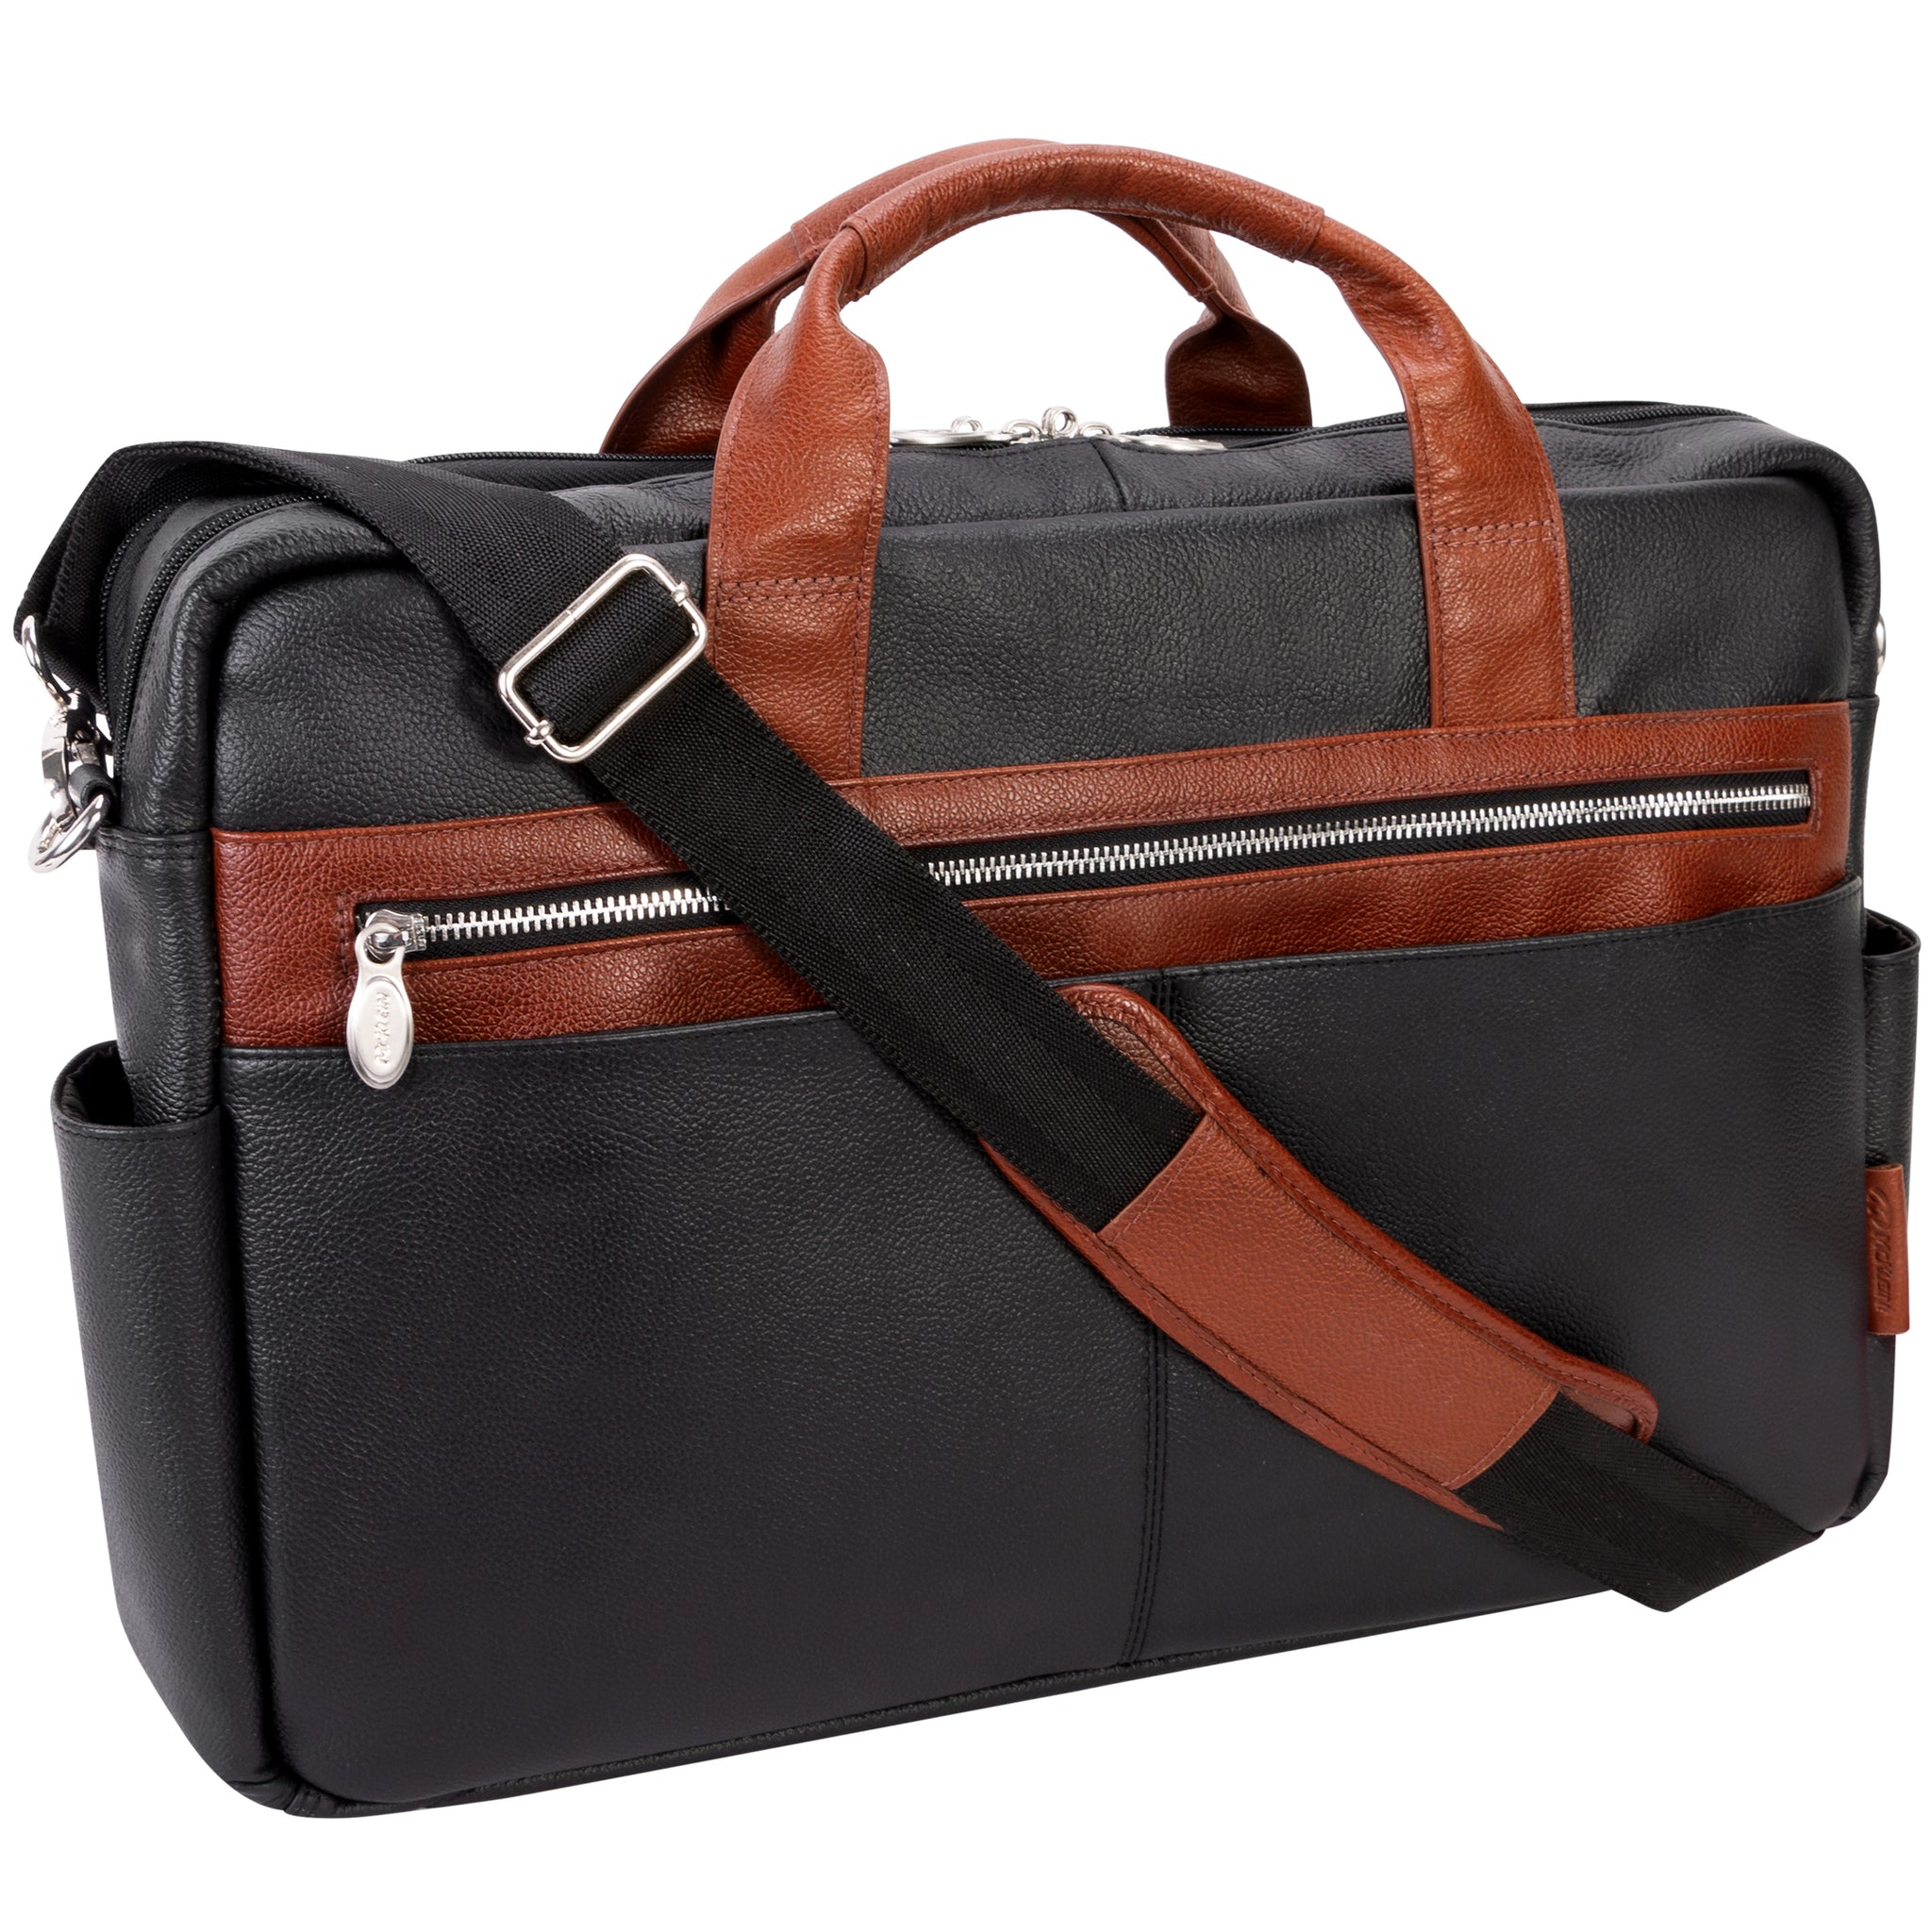 McKlein SOUTHPORT 17" Leather, Two-Tone, Dual-Compartment, Laptop & Tablet Briefcase